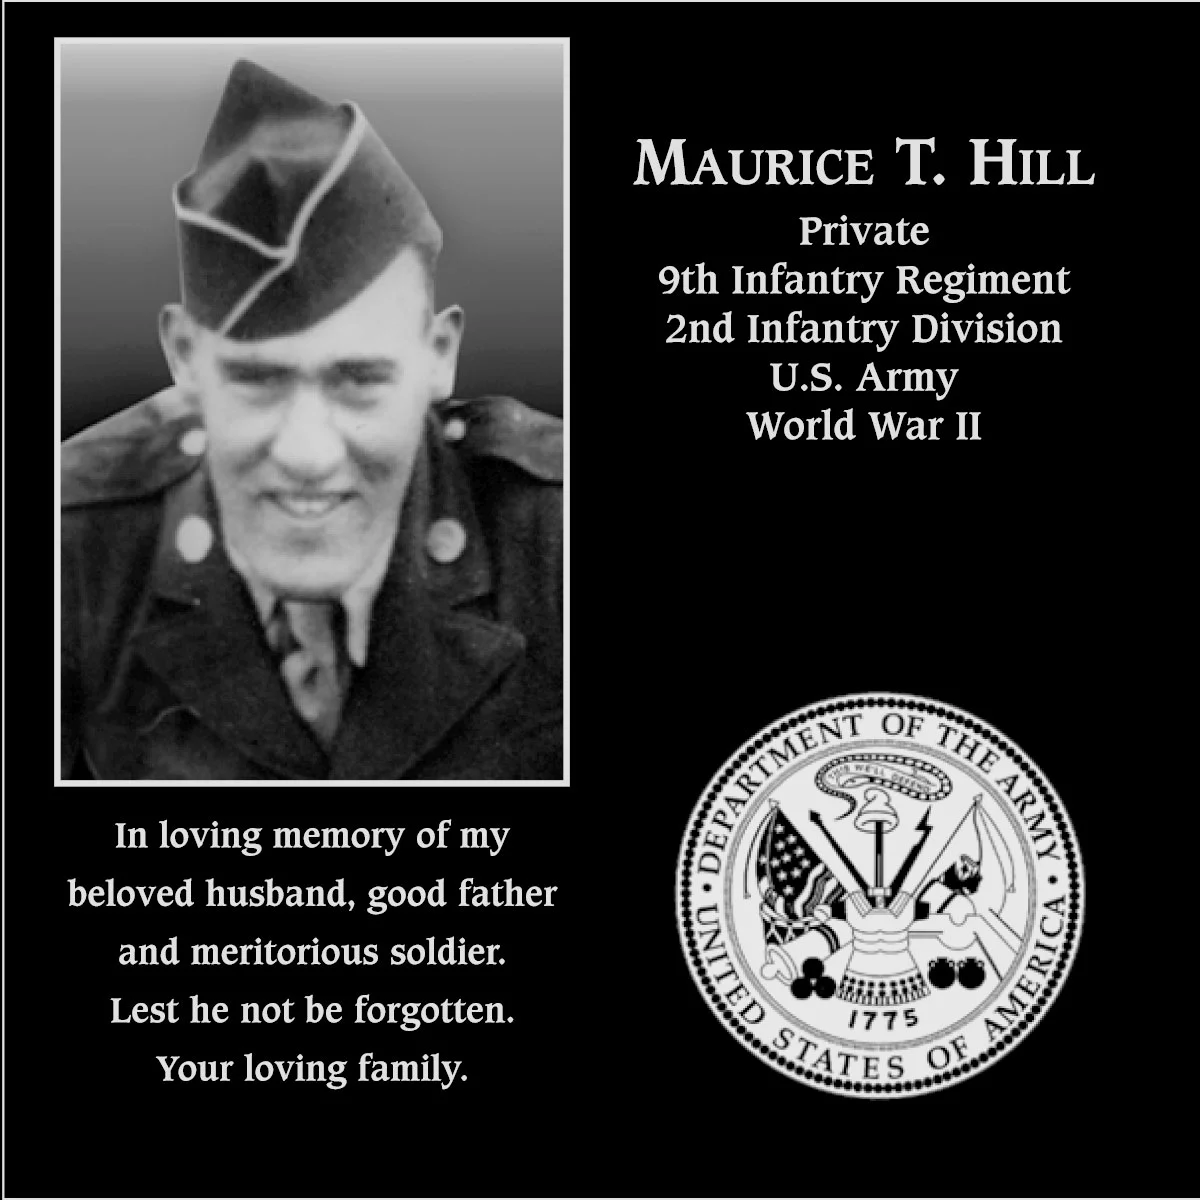 Maurice T. Hill